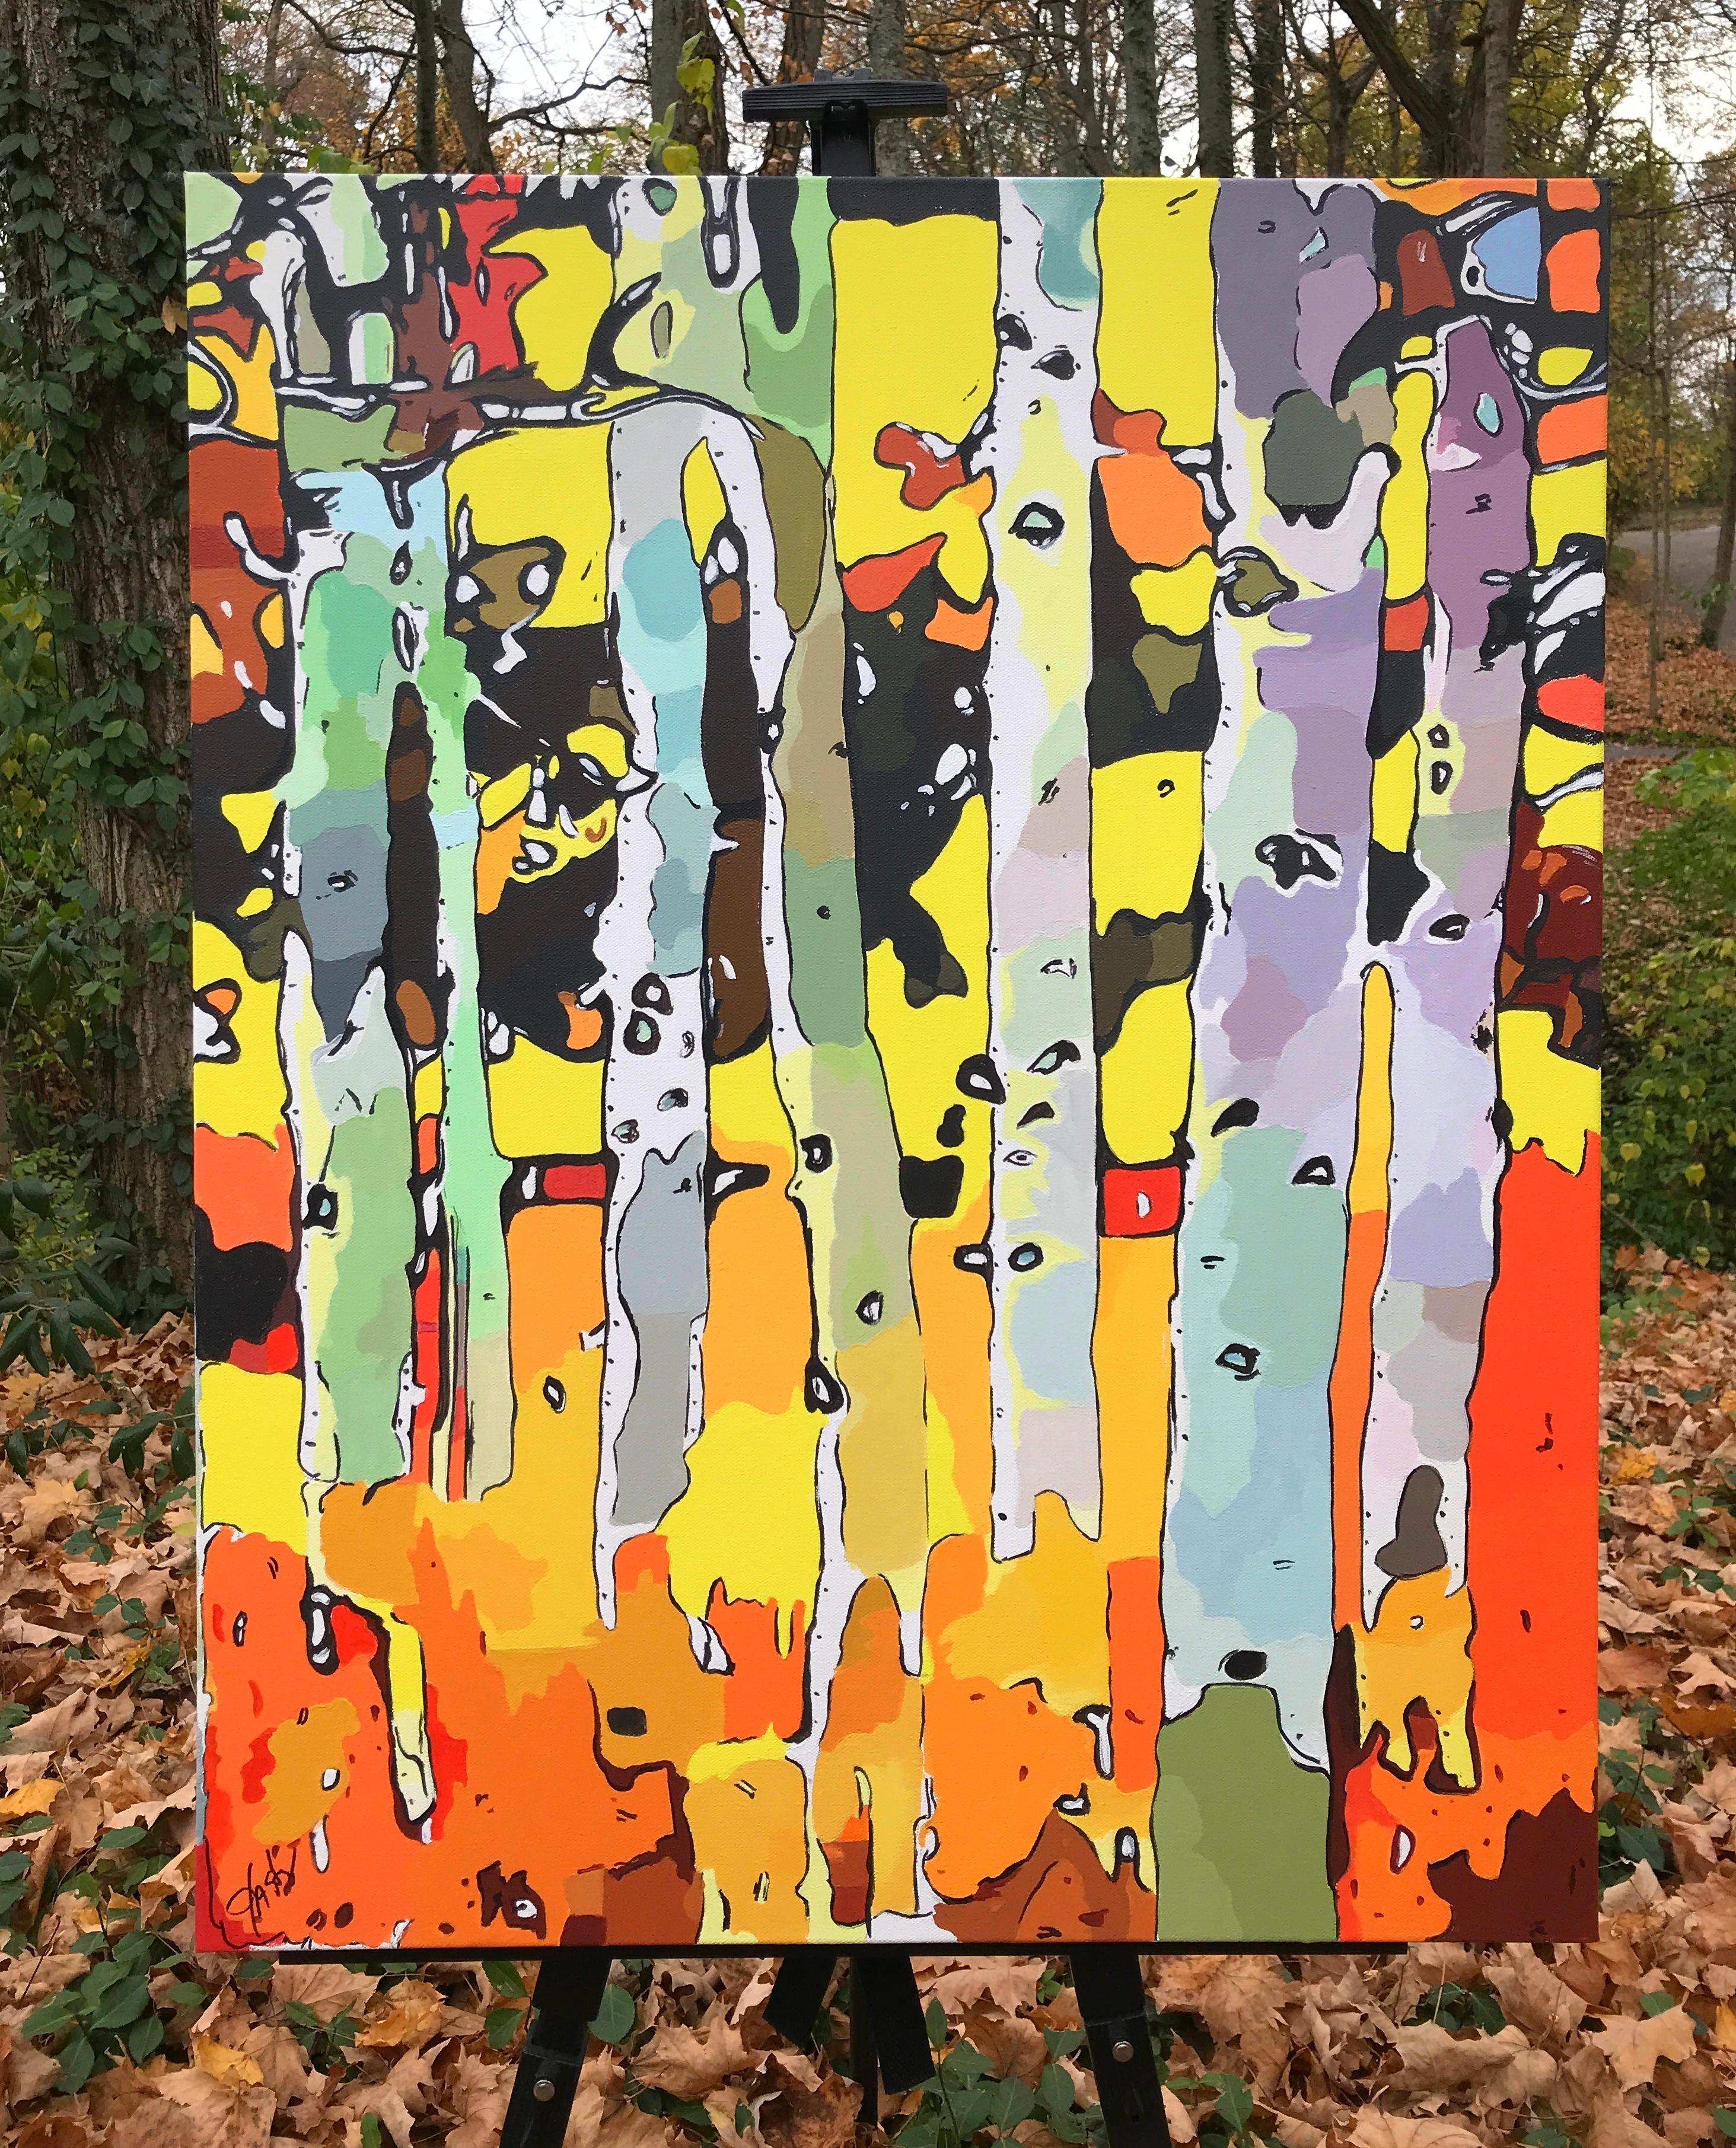 <p>Artist Comments<br>Artist John Jaster displays a forest with tall aspens rendered in a playfully abstract style. Bold shades of yellow, orange and red suggest a warm autumn day in the woods. In his process, John creates stunning color